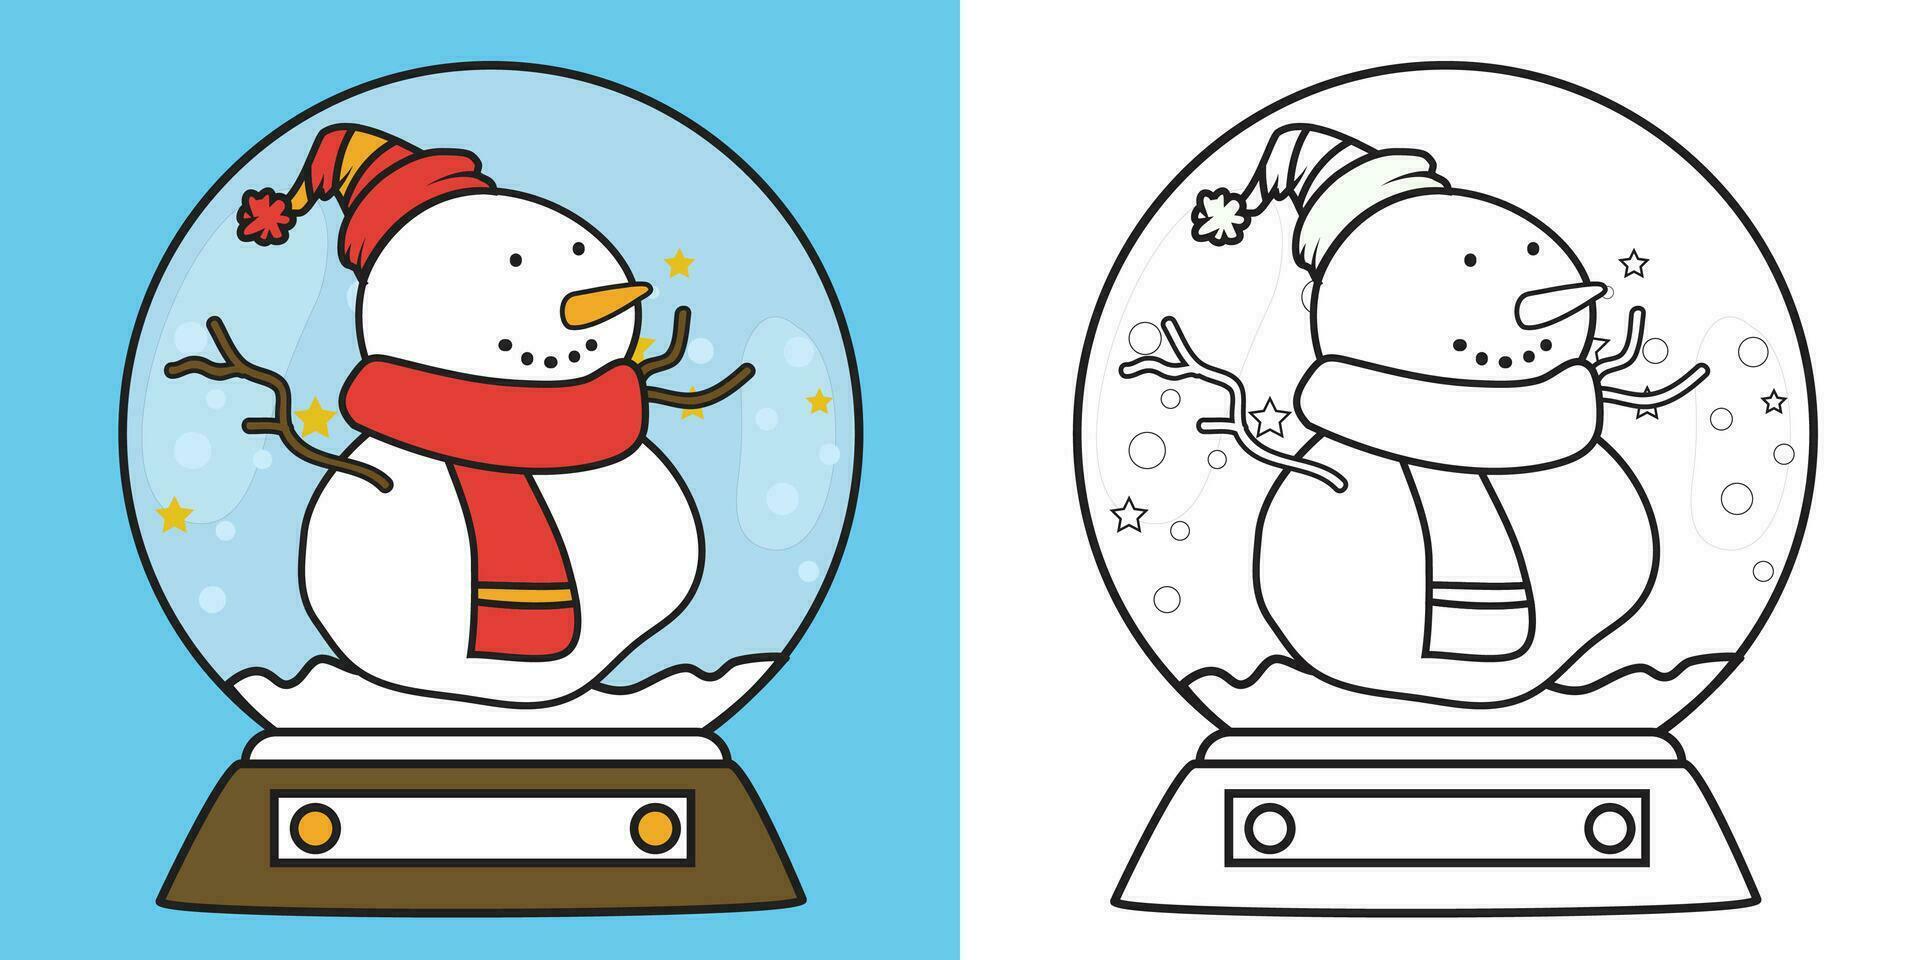 Merry Christmas coloring page. Hand drawn vector illustration. Coloring book pages for adults and kids. Coloring snow globe. Vector file.